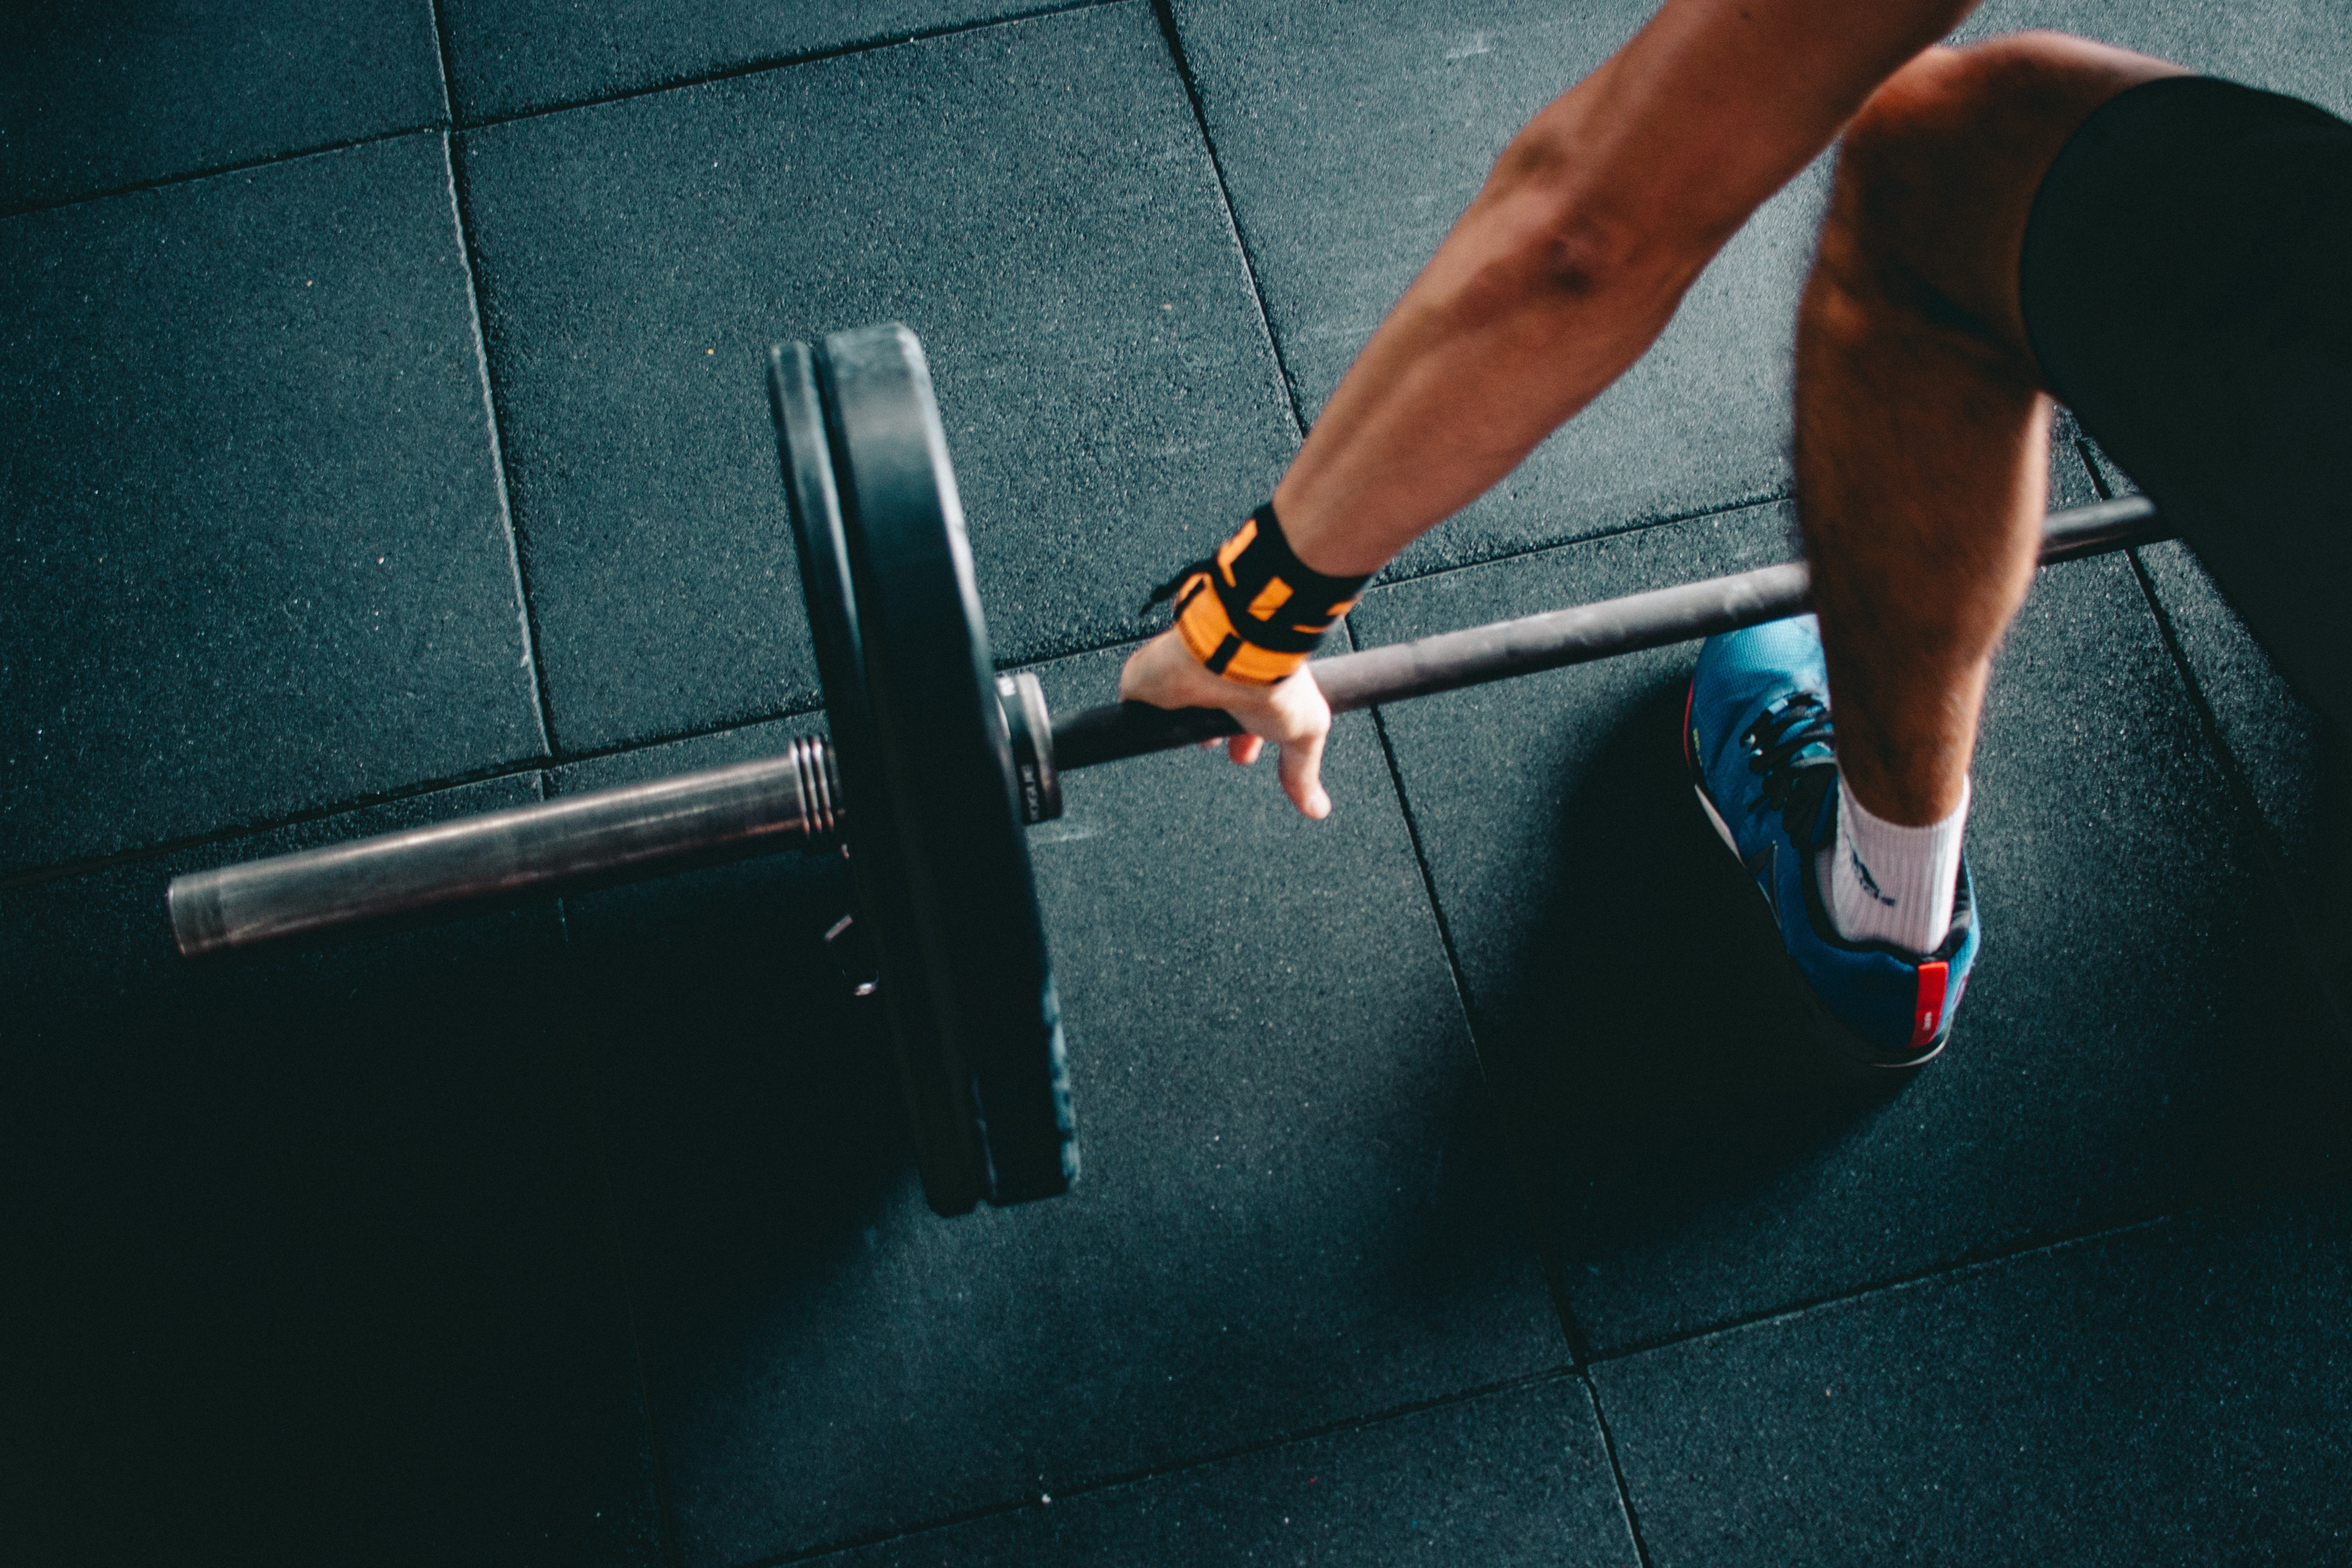 Every Billionaire's Weekend Habit | Exercise is a must to stay fit and healthy | Photo by Victor Freitas from Pexels